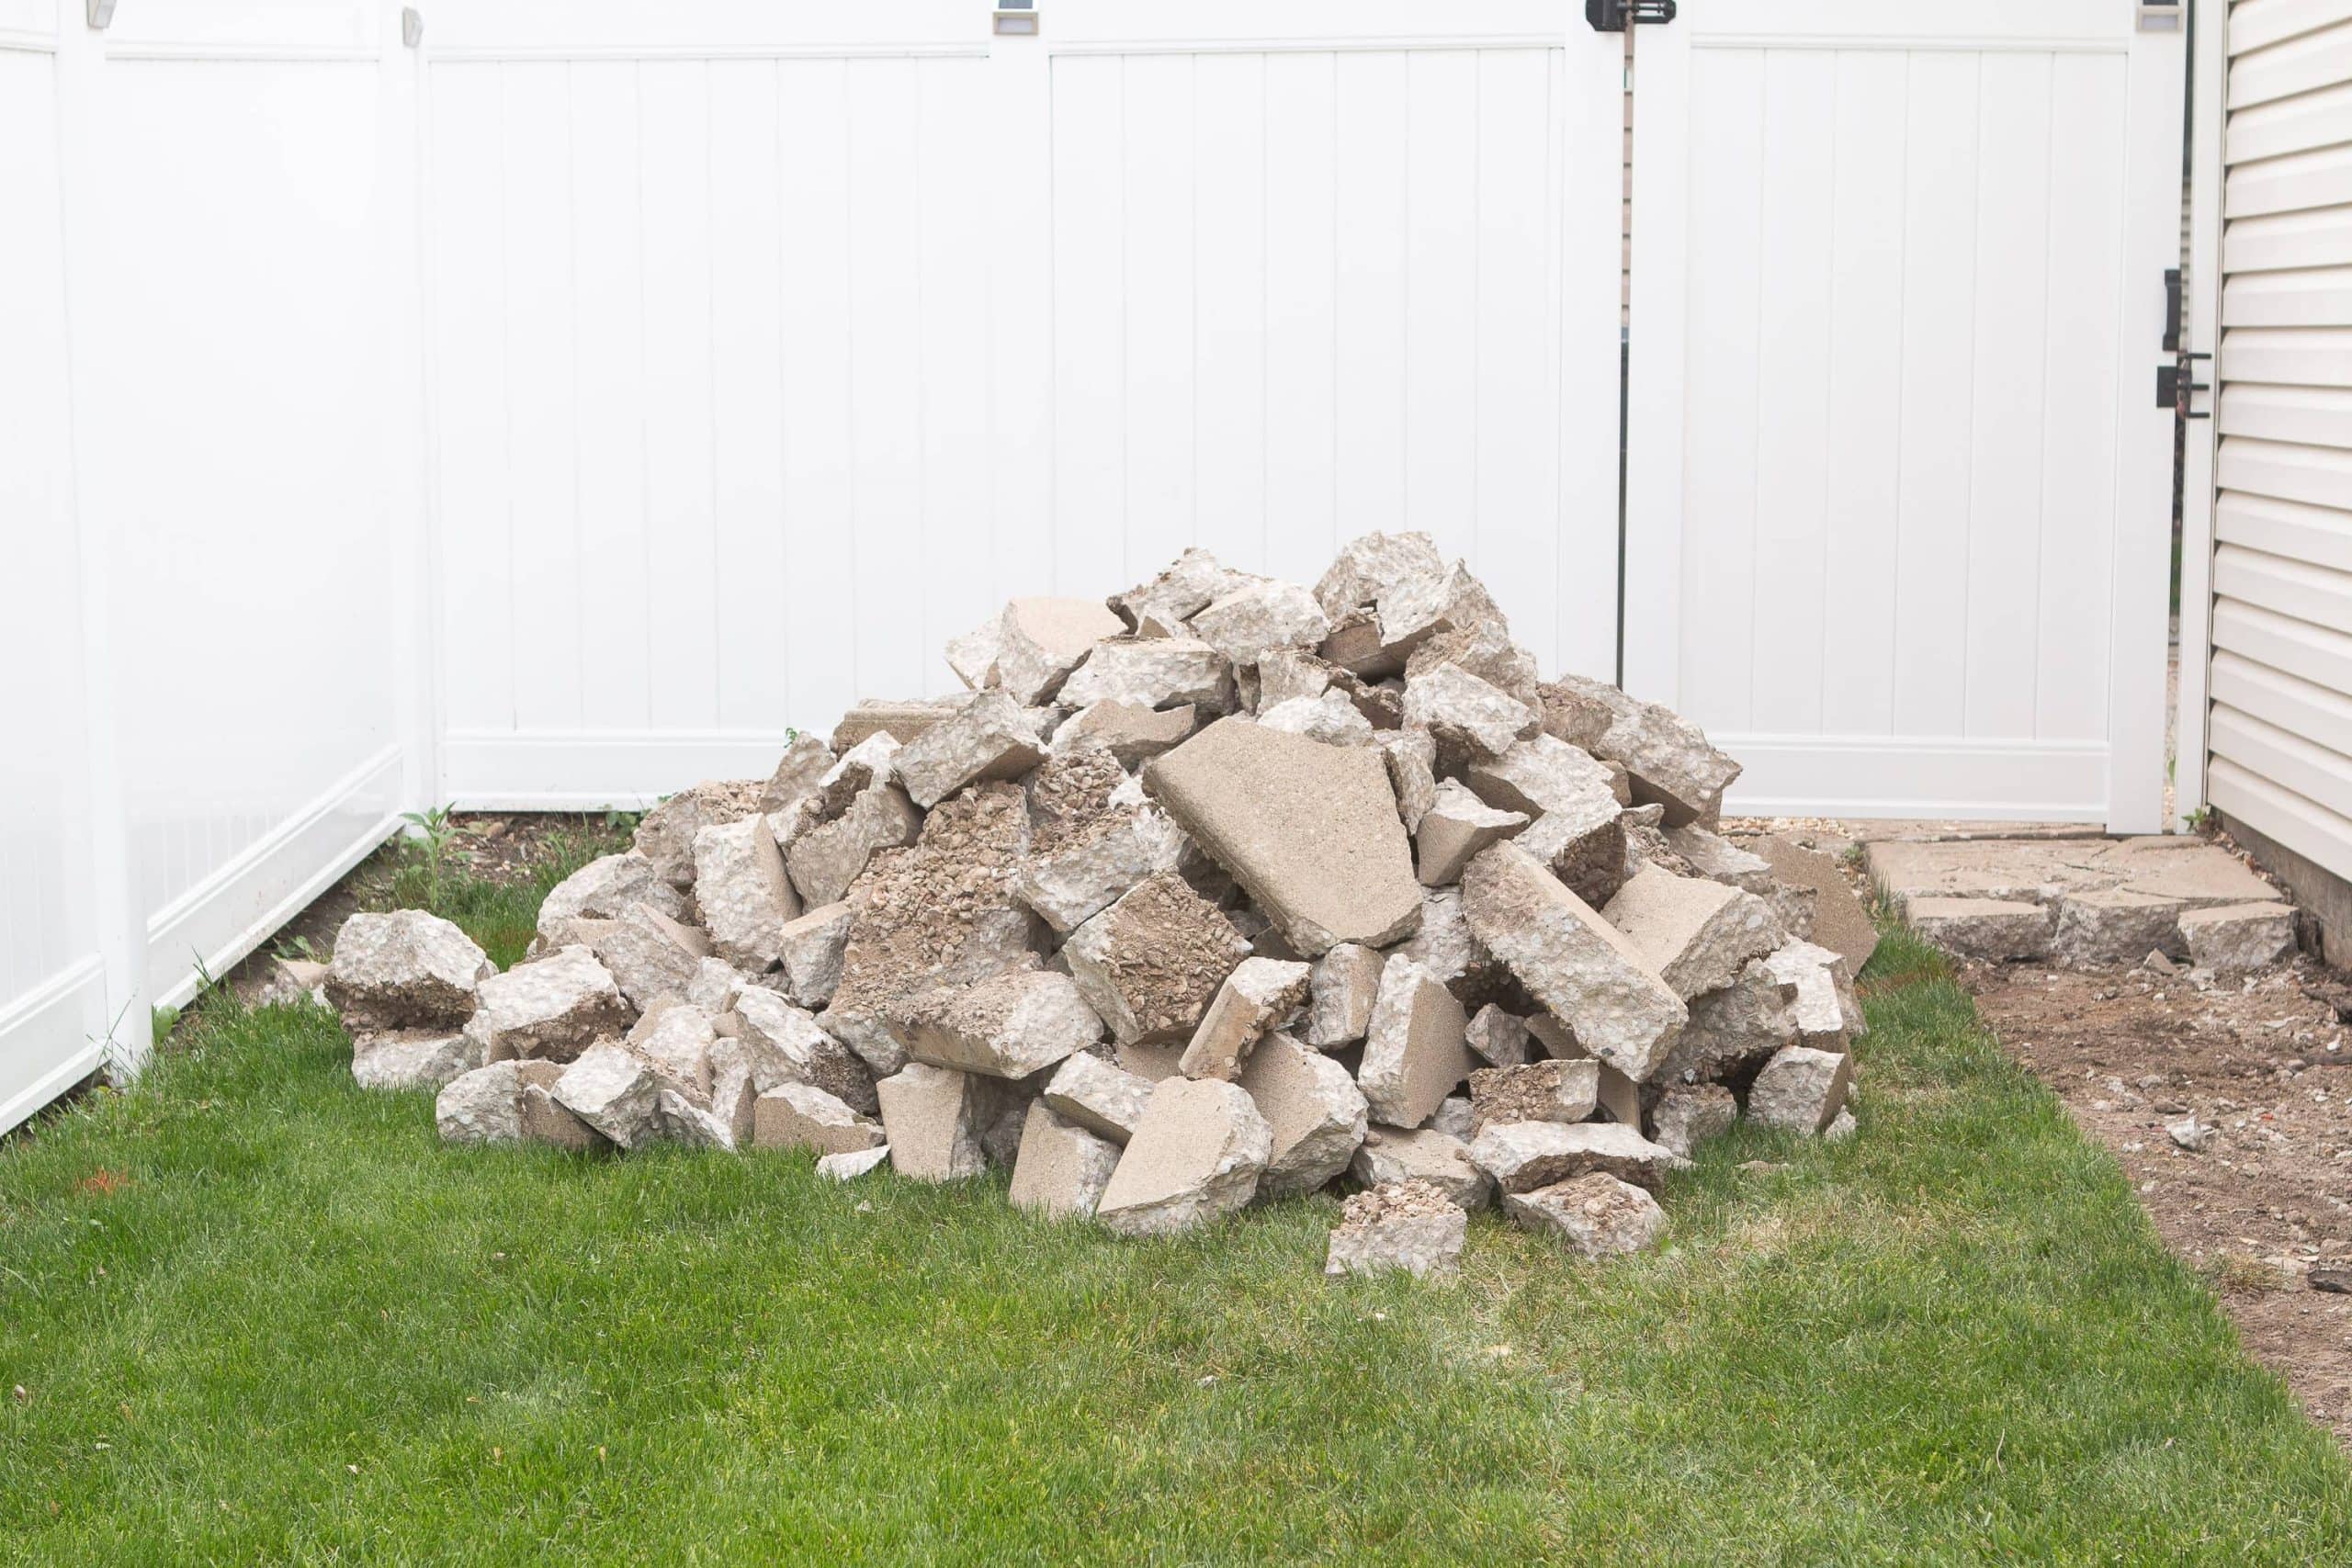 A bit pile of construction materials in our backyard